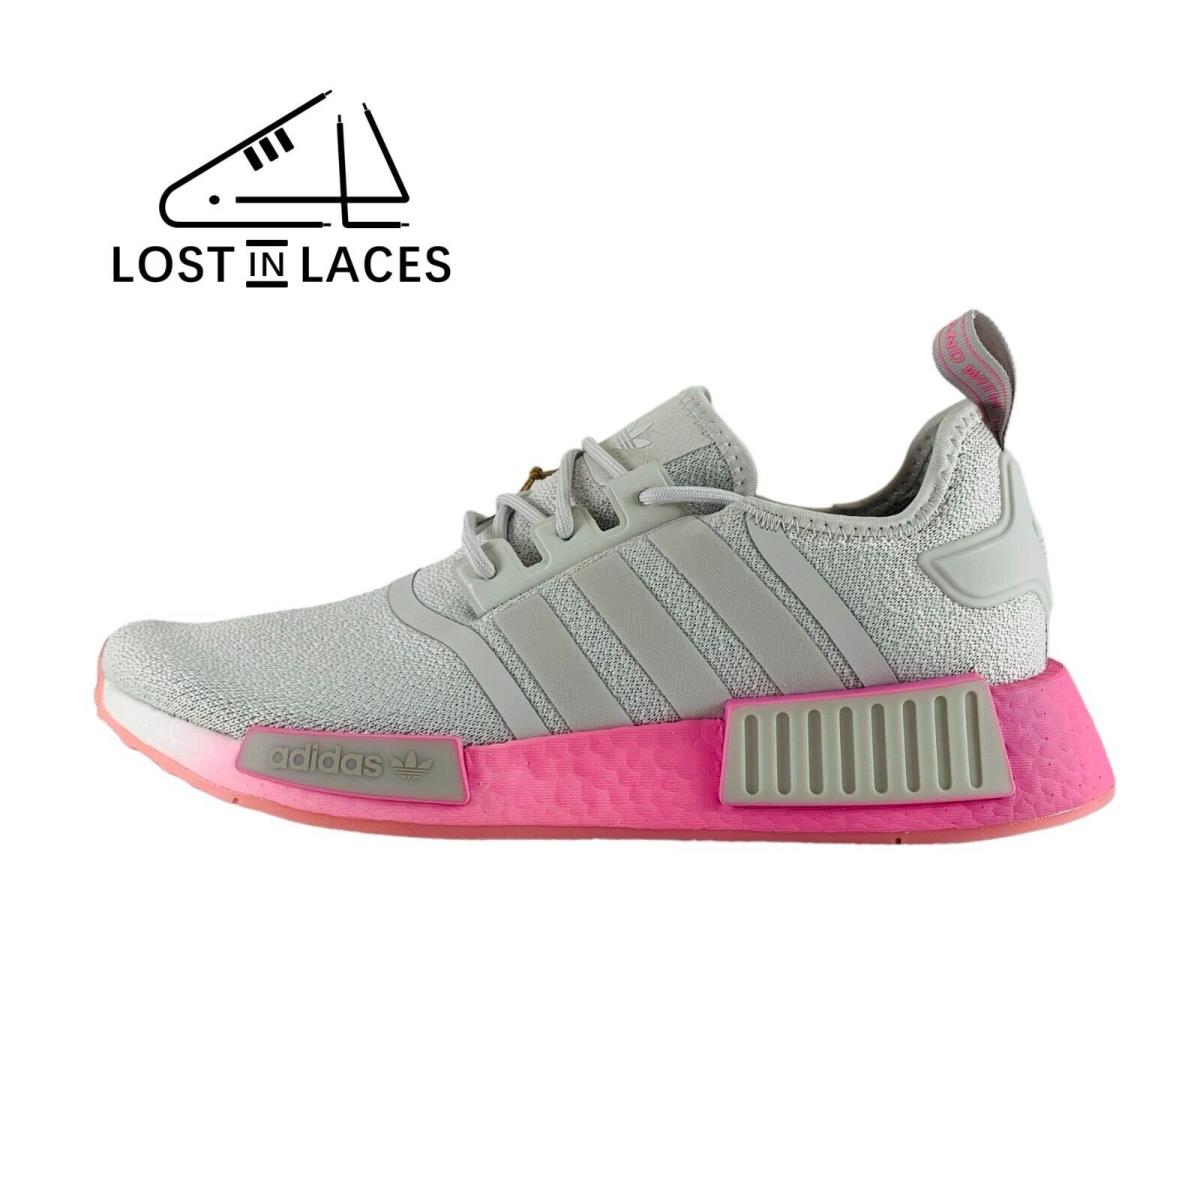 Adidas NMD_R1 Grey Bliss Pink Sneakers Shoes GW9462 Women`s Sizes - Gray